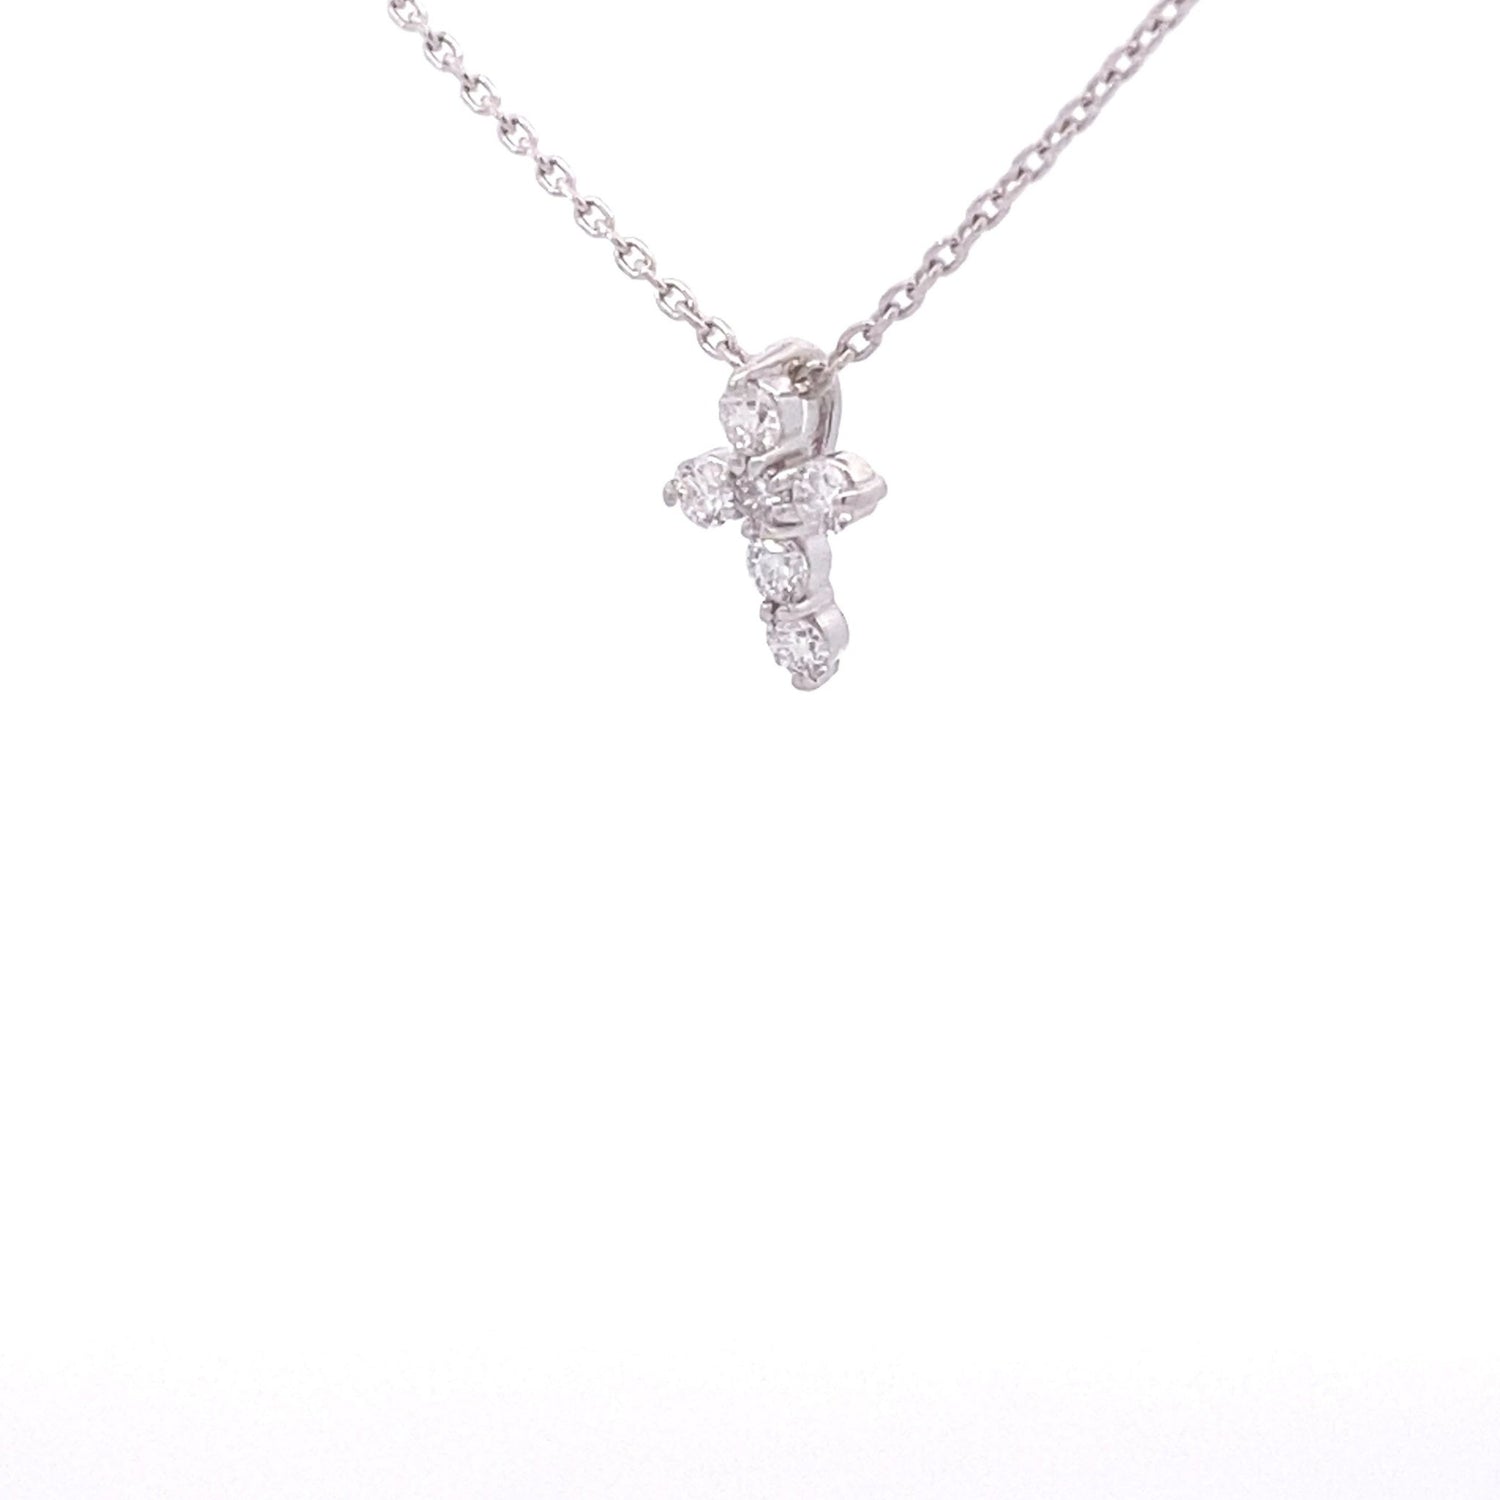 Necklace- Small Diamond Cross Pendant with 6 diamonds in 14kt white gold - Gaines Jewelers